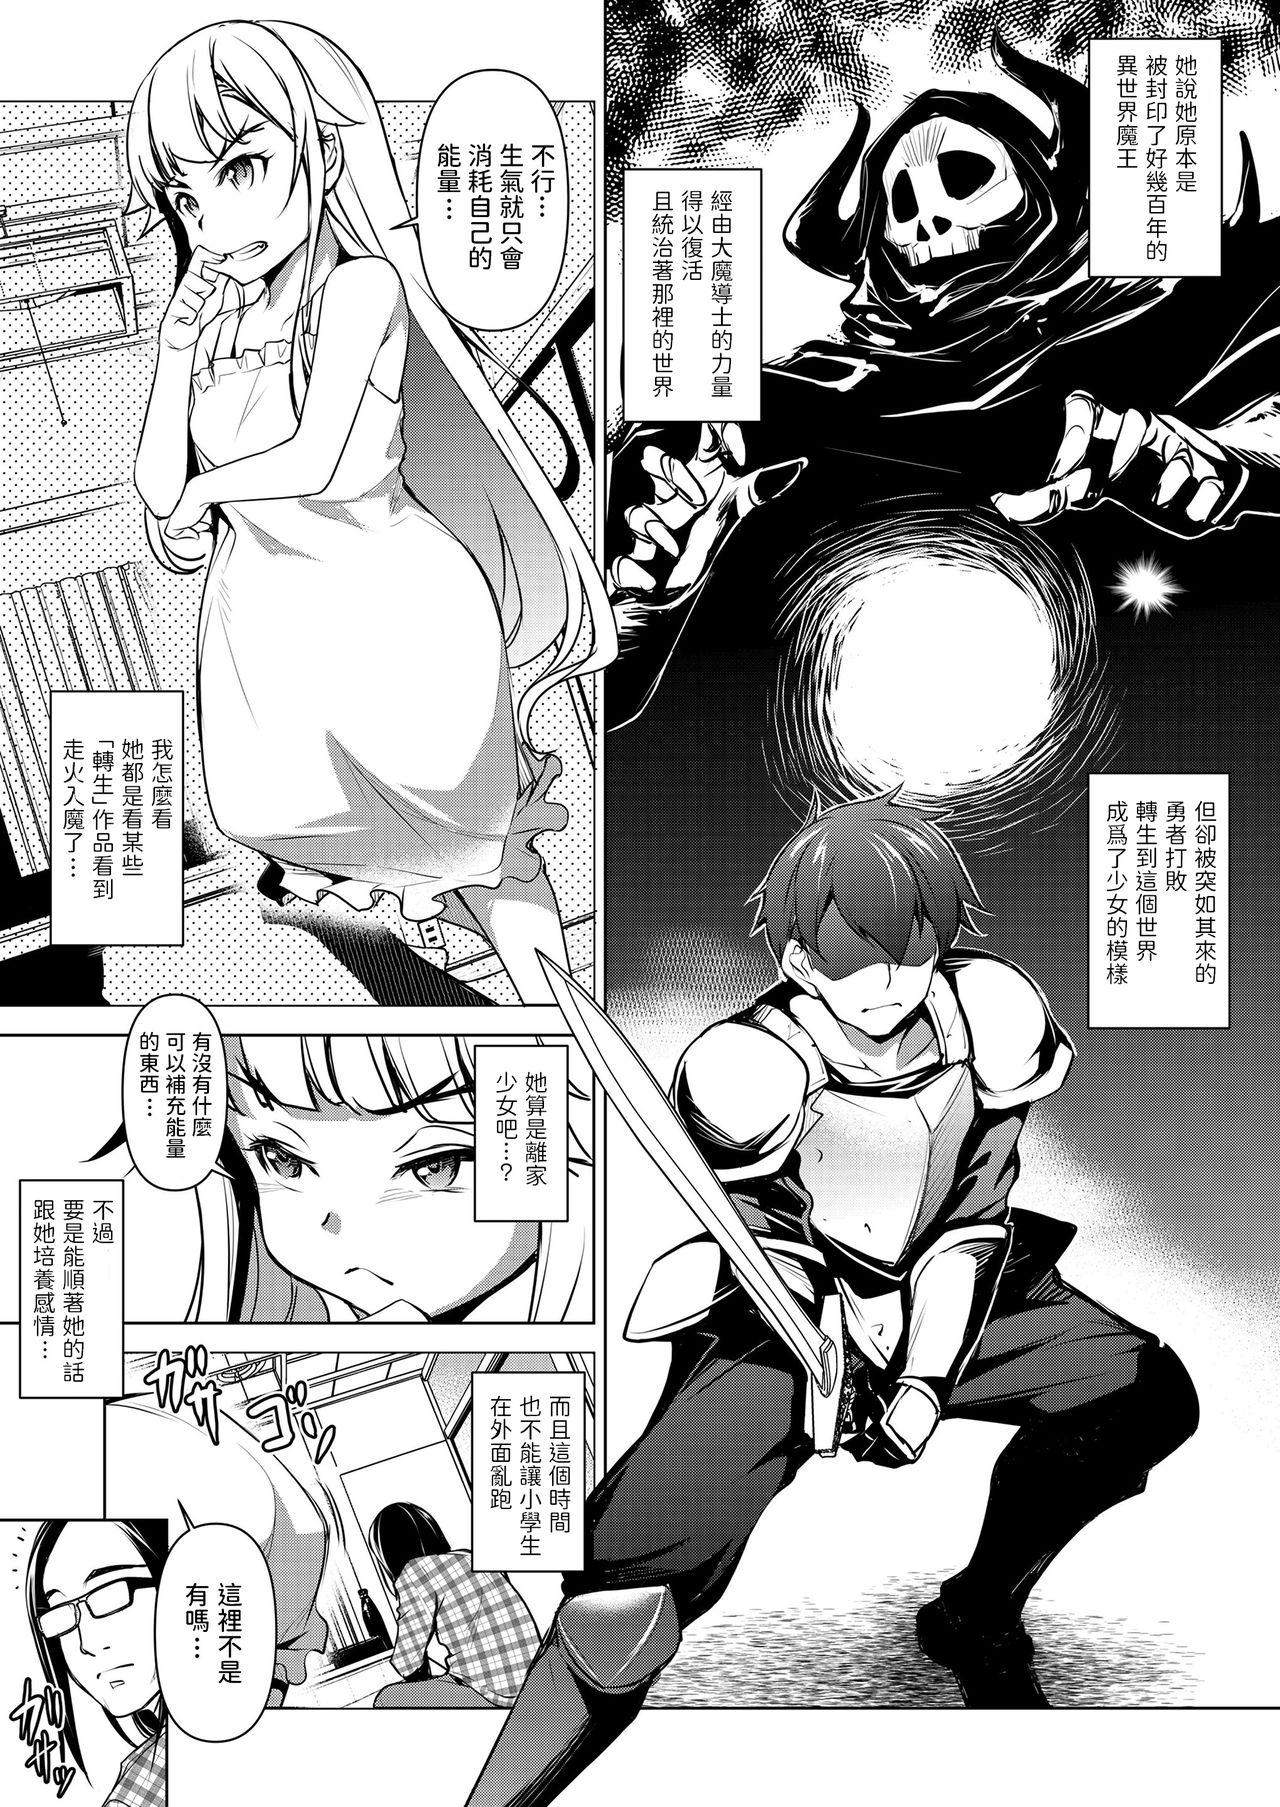 Yanks Featured Tensei Maou Gaydudes - Page 5